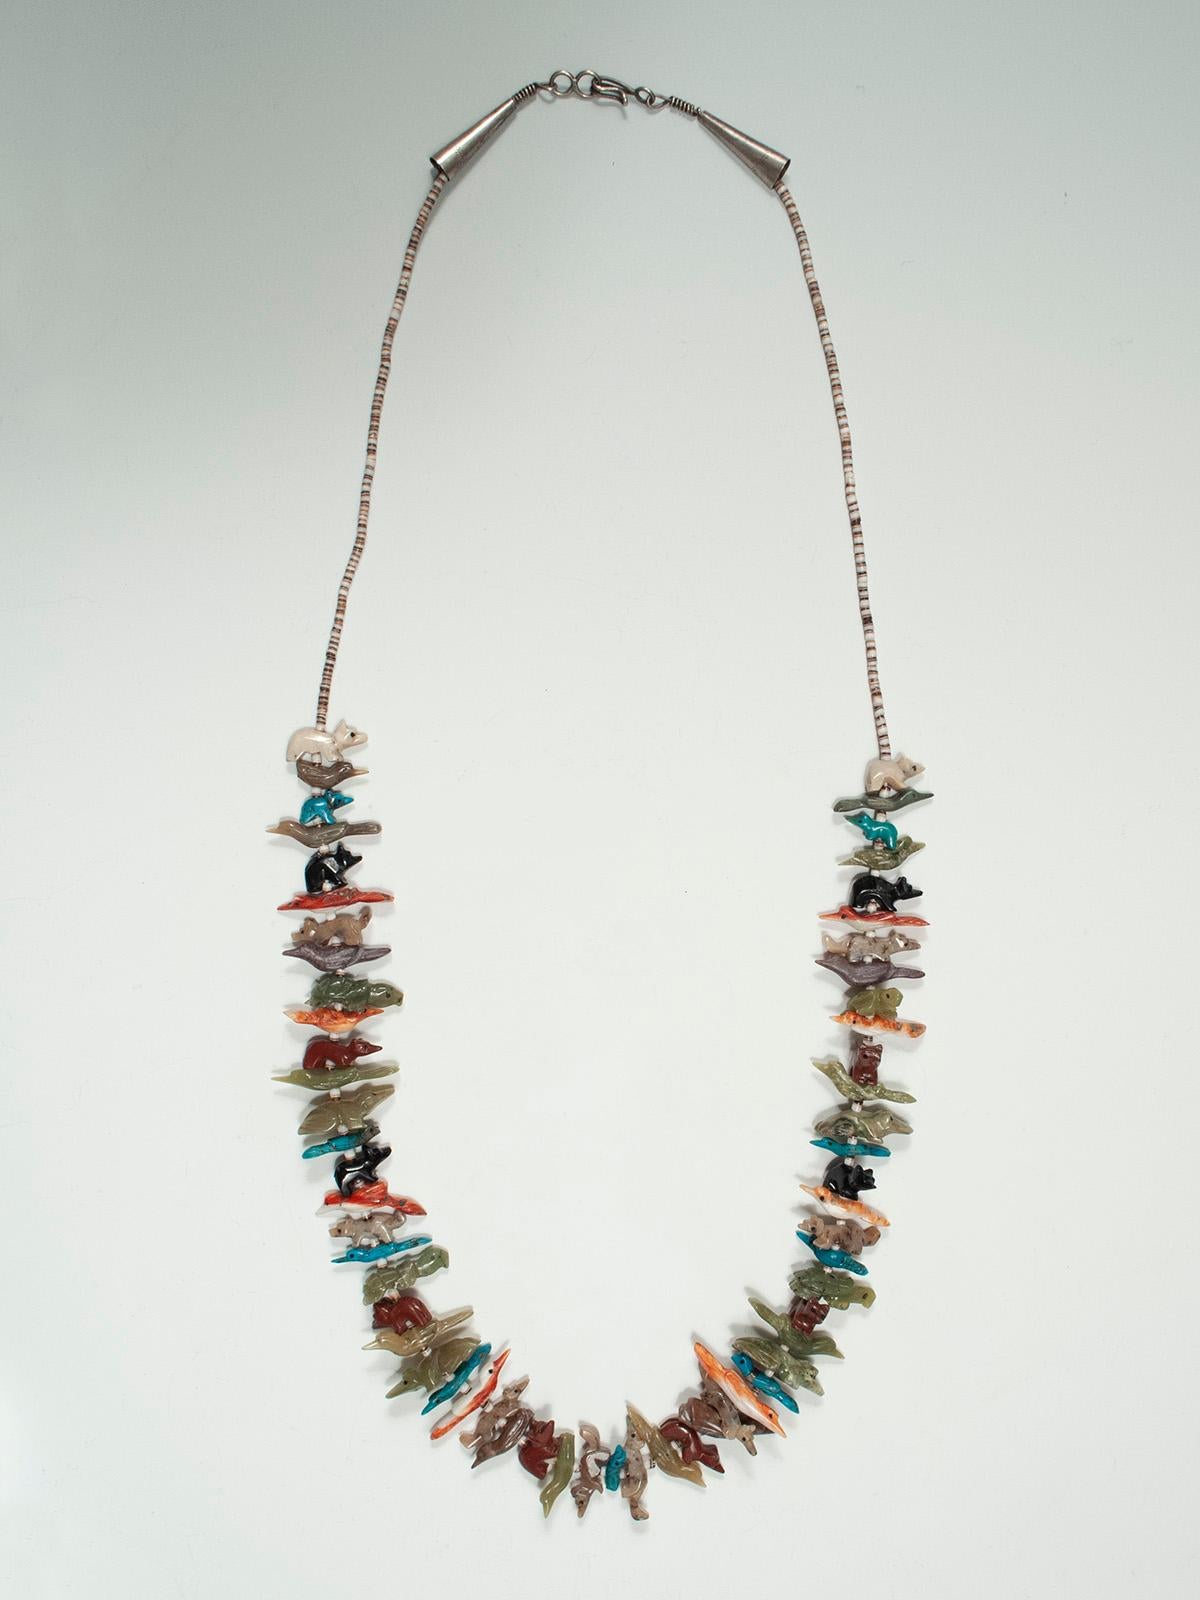 Mid-20th Century Zuni Single Strand Fetish Native American Necklace

A simple colorful single strand fetish necklace with birds, frogs, bears, turtles and a variety of other vermin and reptiles in a wide array of different stones. The closing is